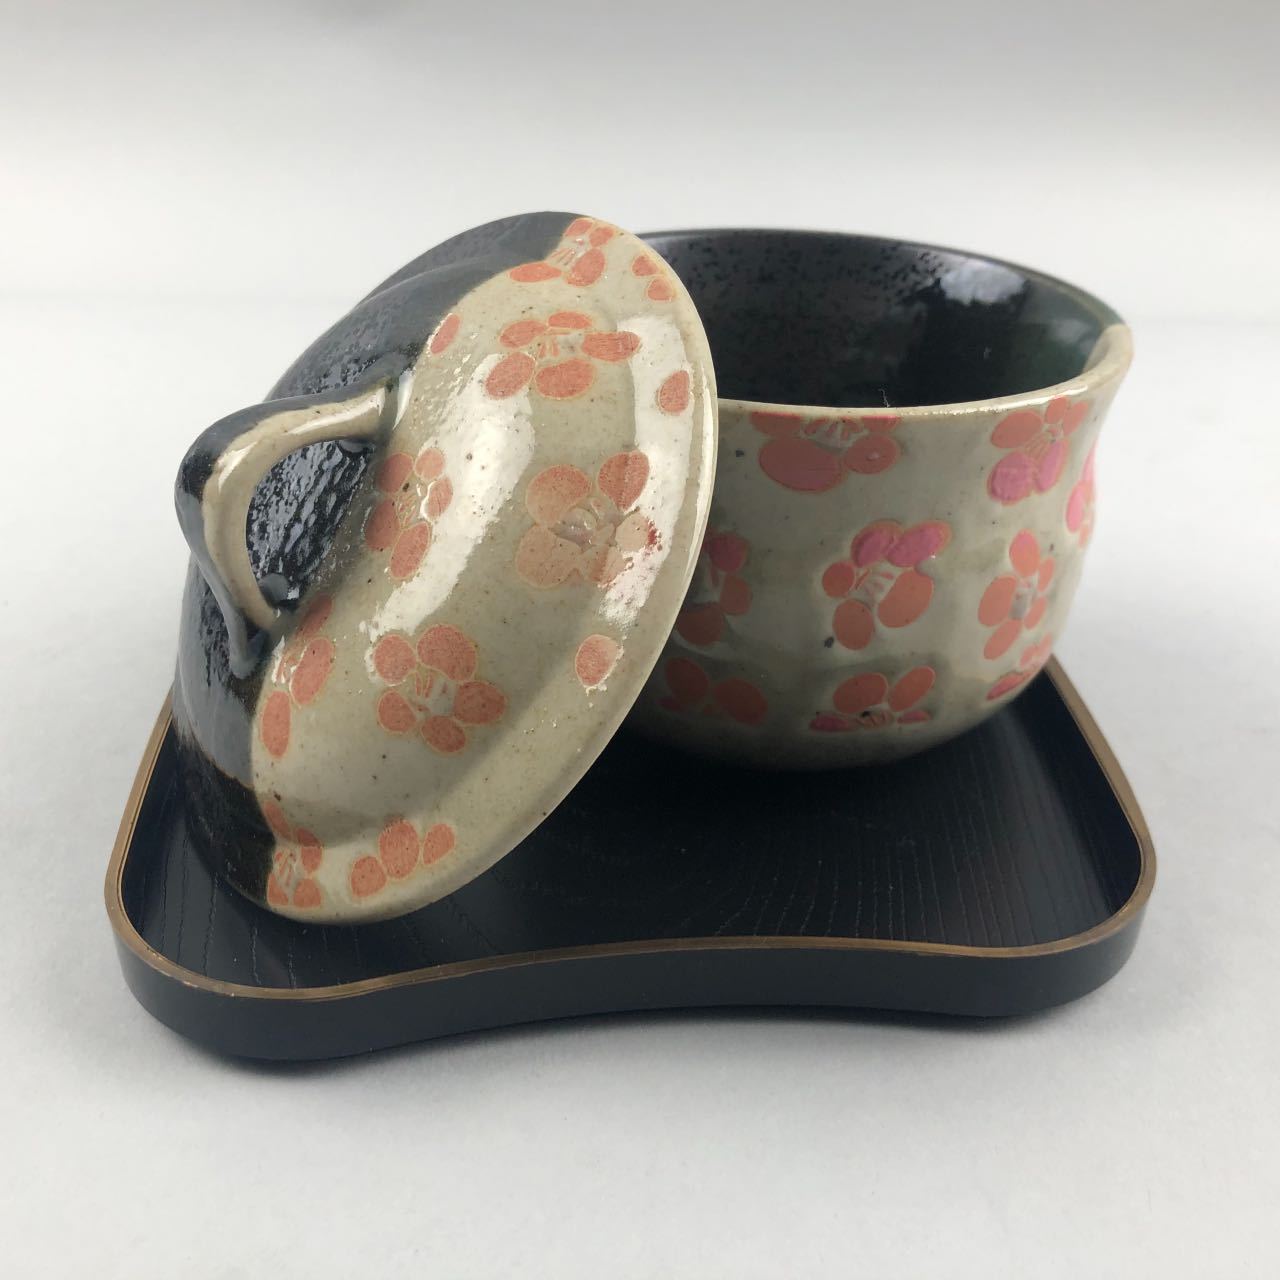 Japanese Unique Soup Dishes with Lid and Tray Restaurant Supply Sale Discount OSARA New York